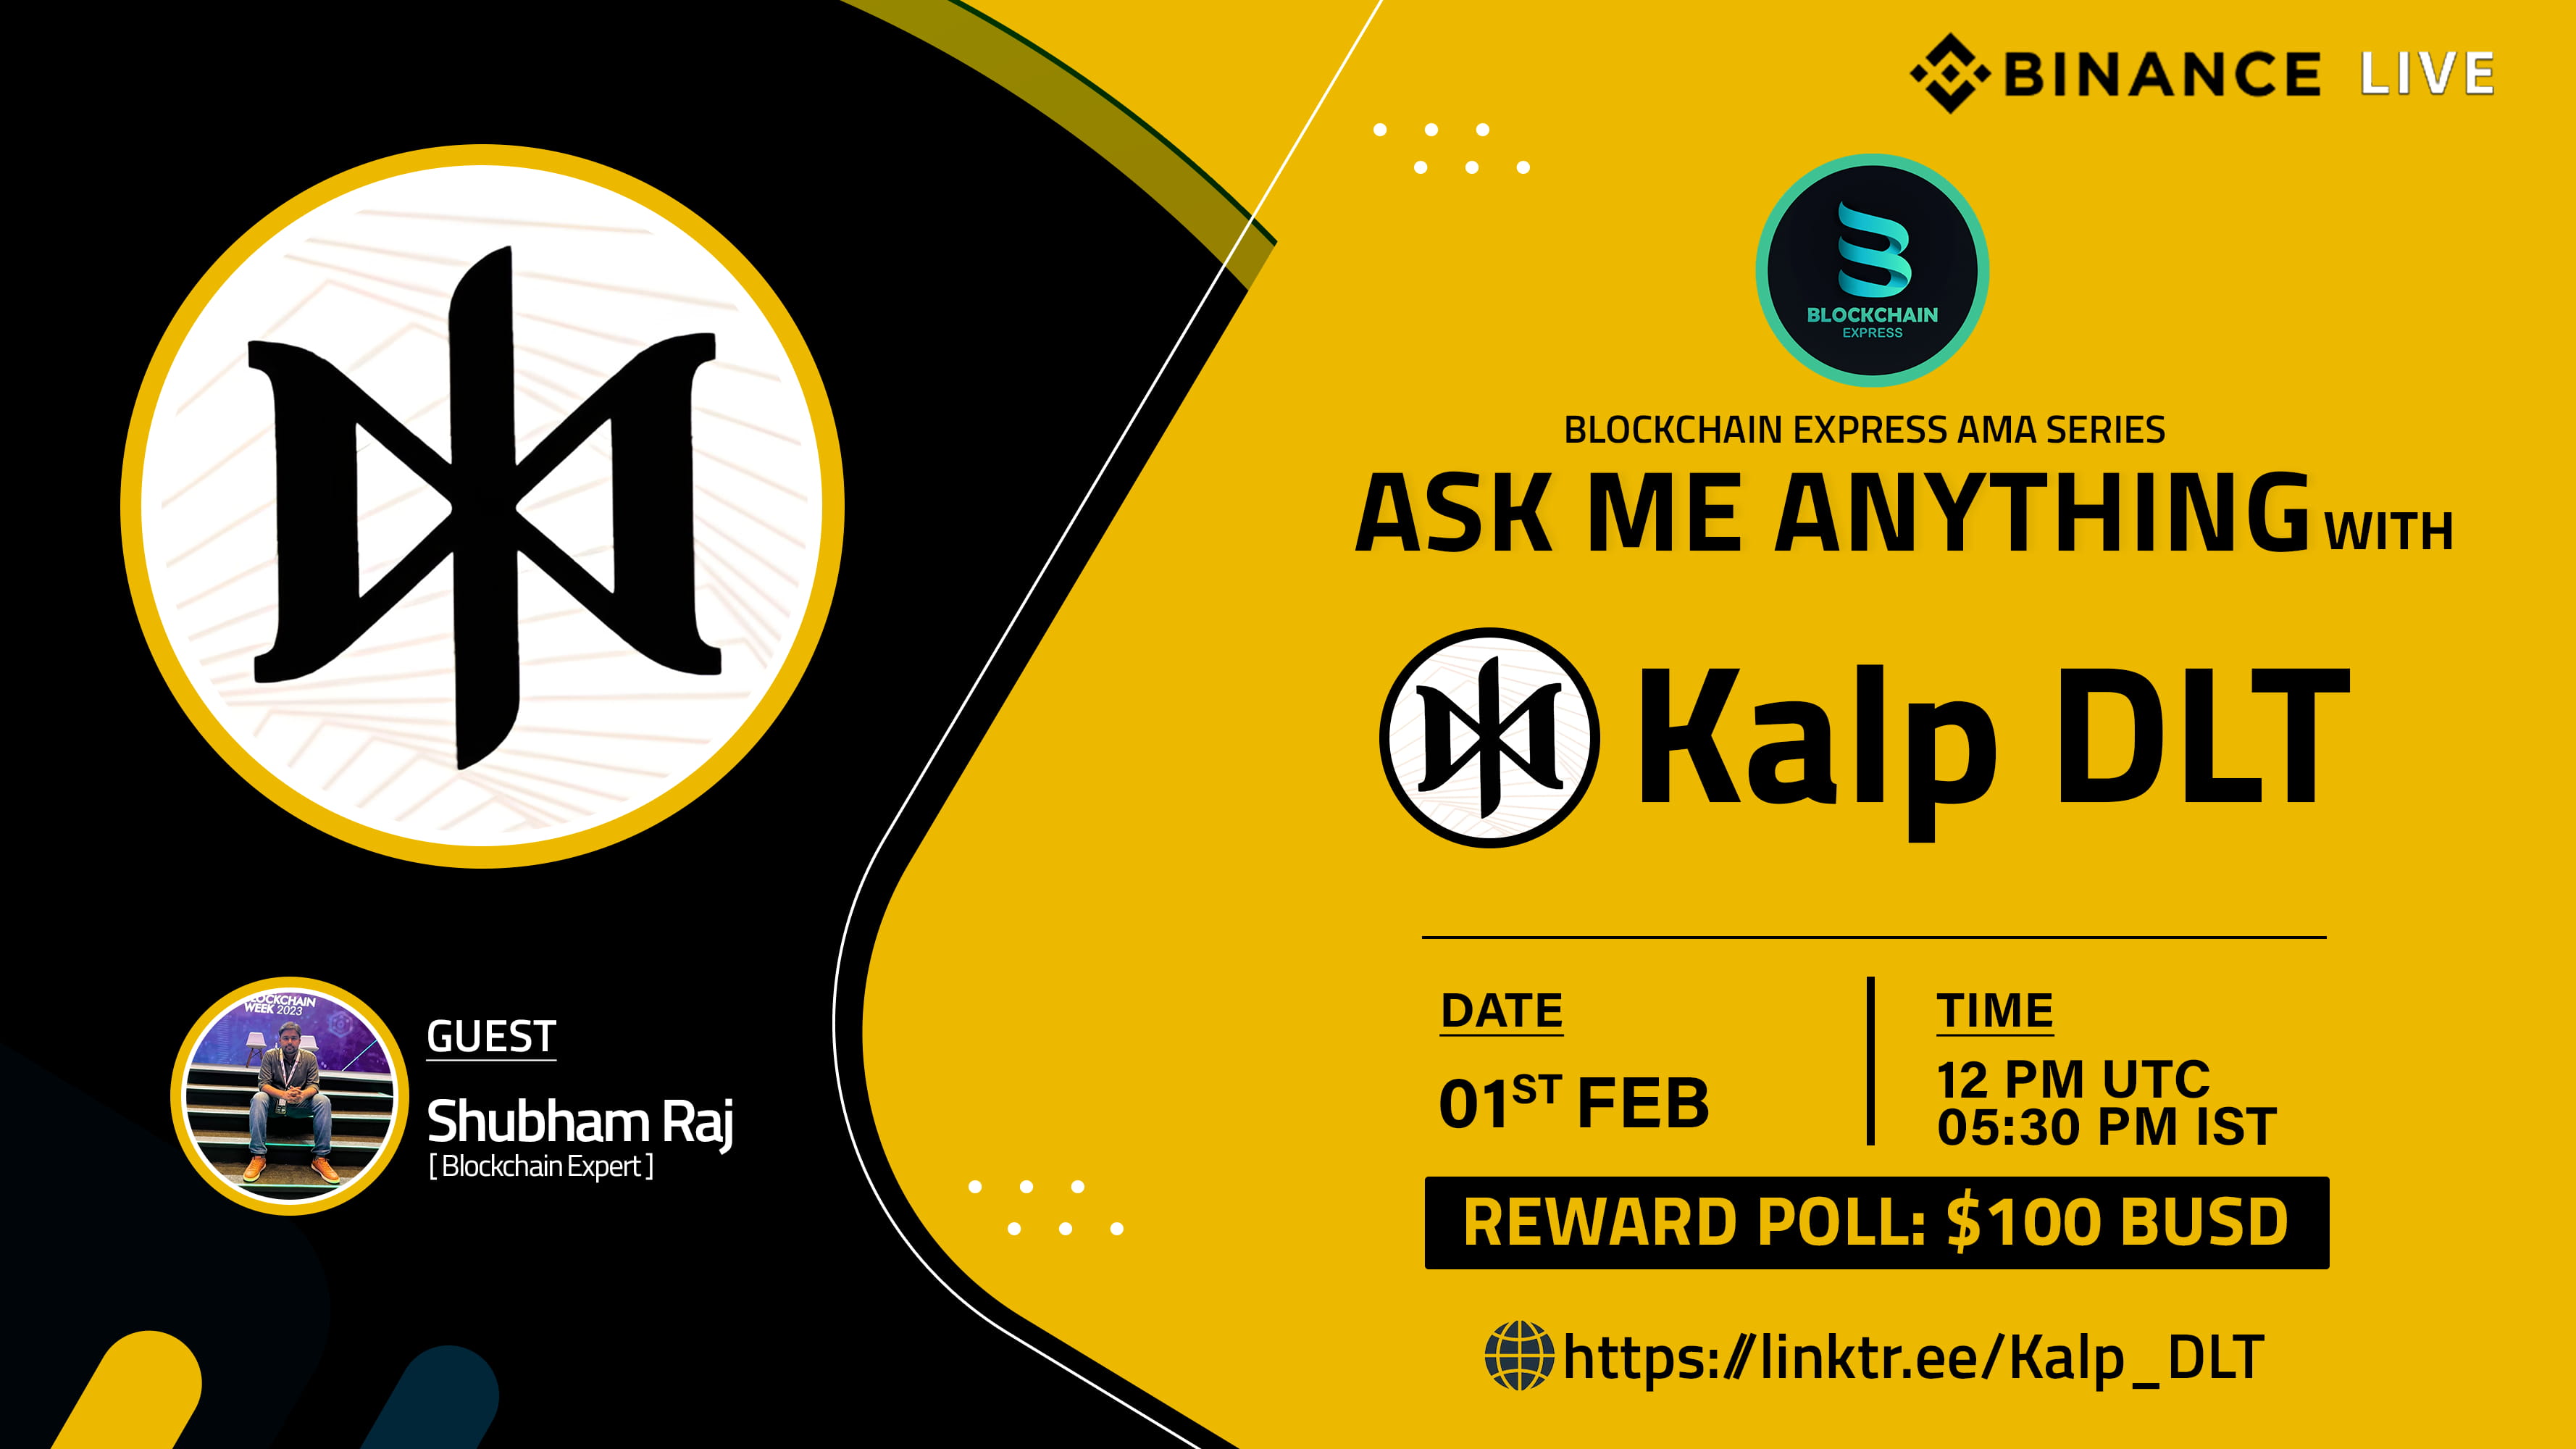 ₿lockchain Express will be hosting an AMA session with" Kalp DLT"